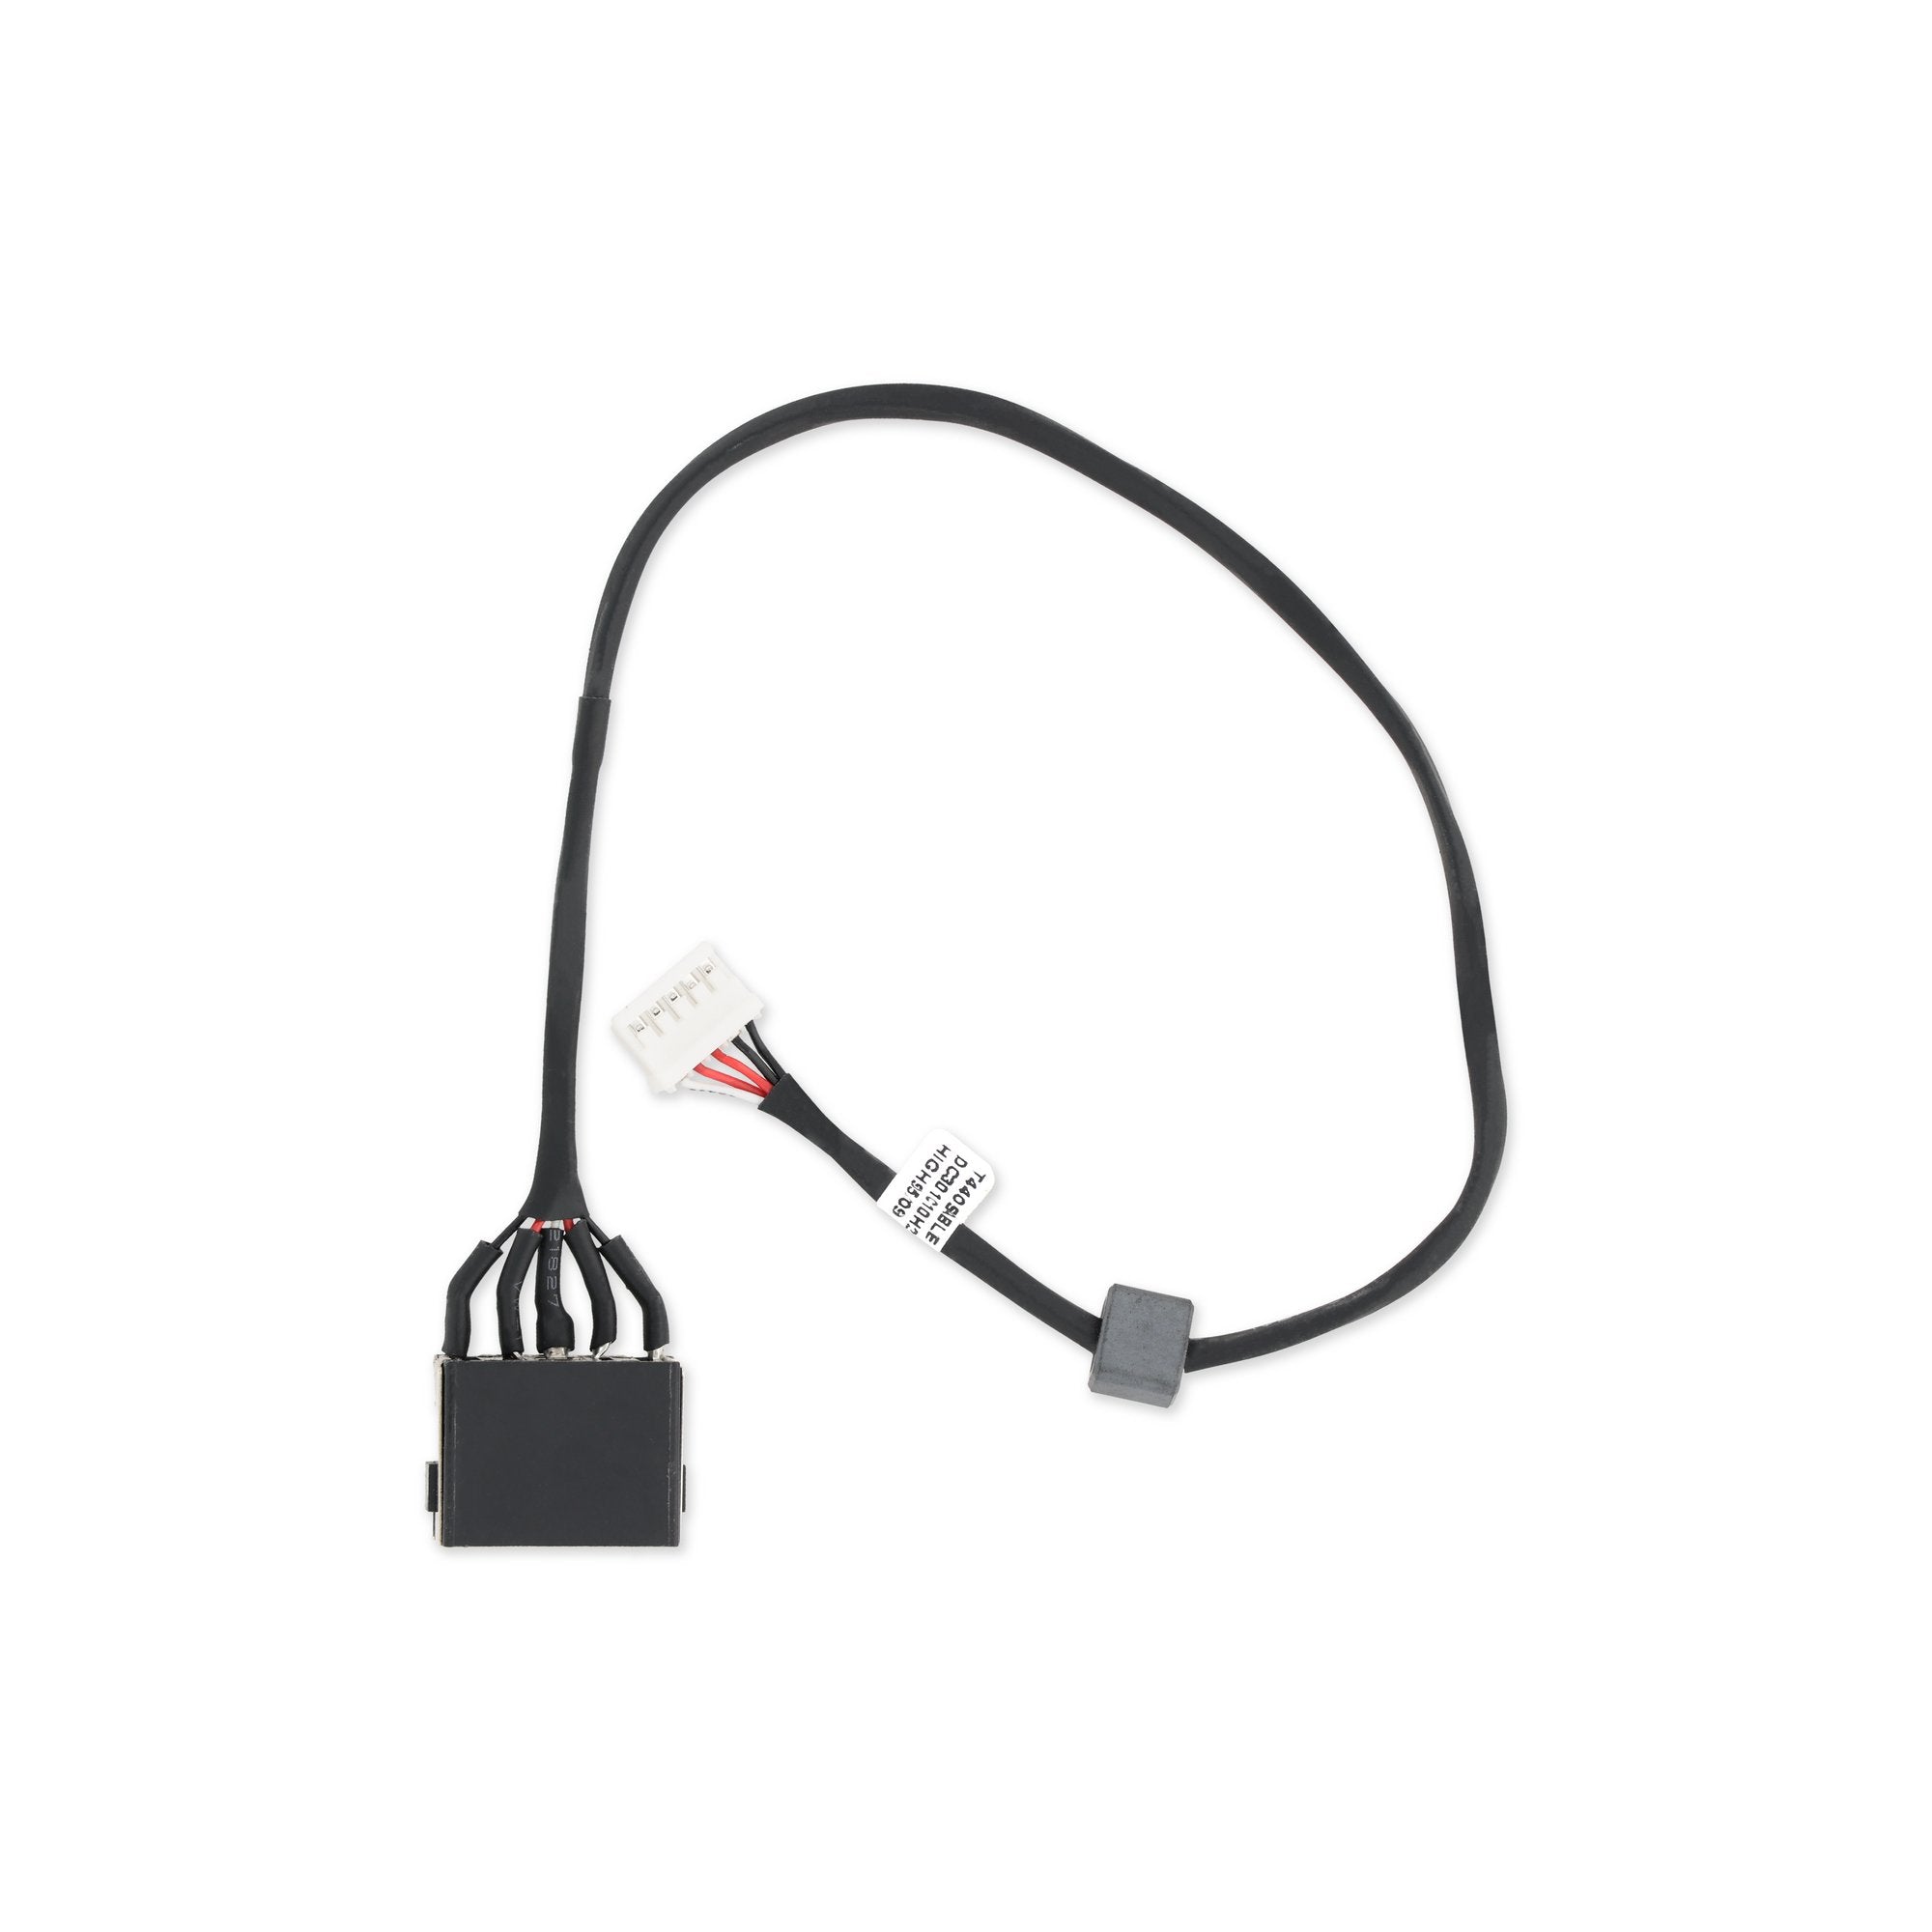 Lenovo ThinkPad DC-IN Cable - DC30100KL00 New